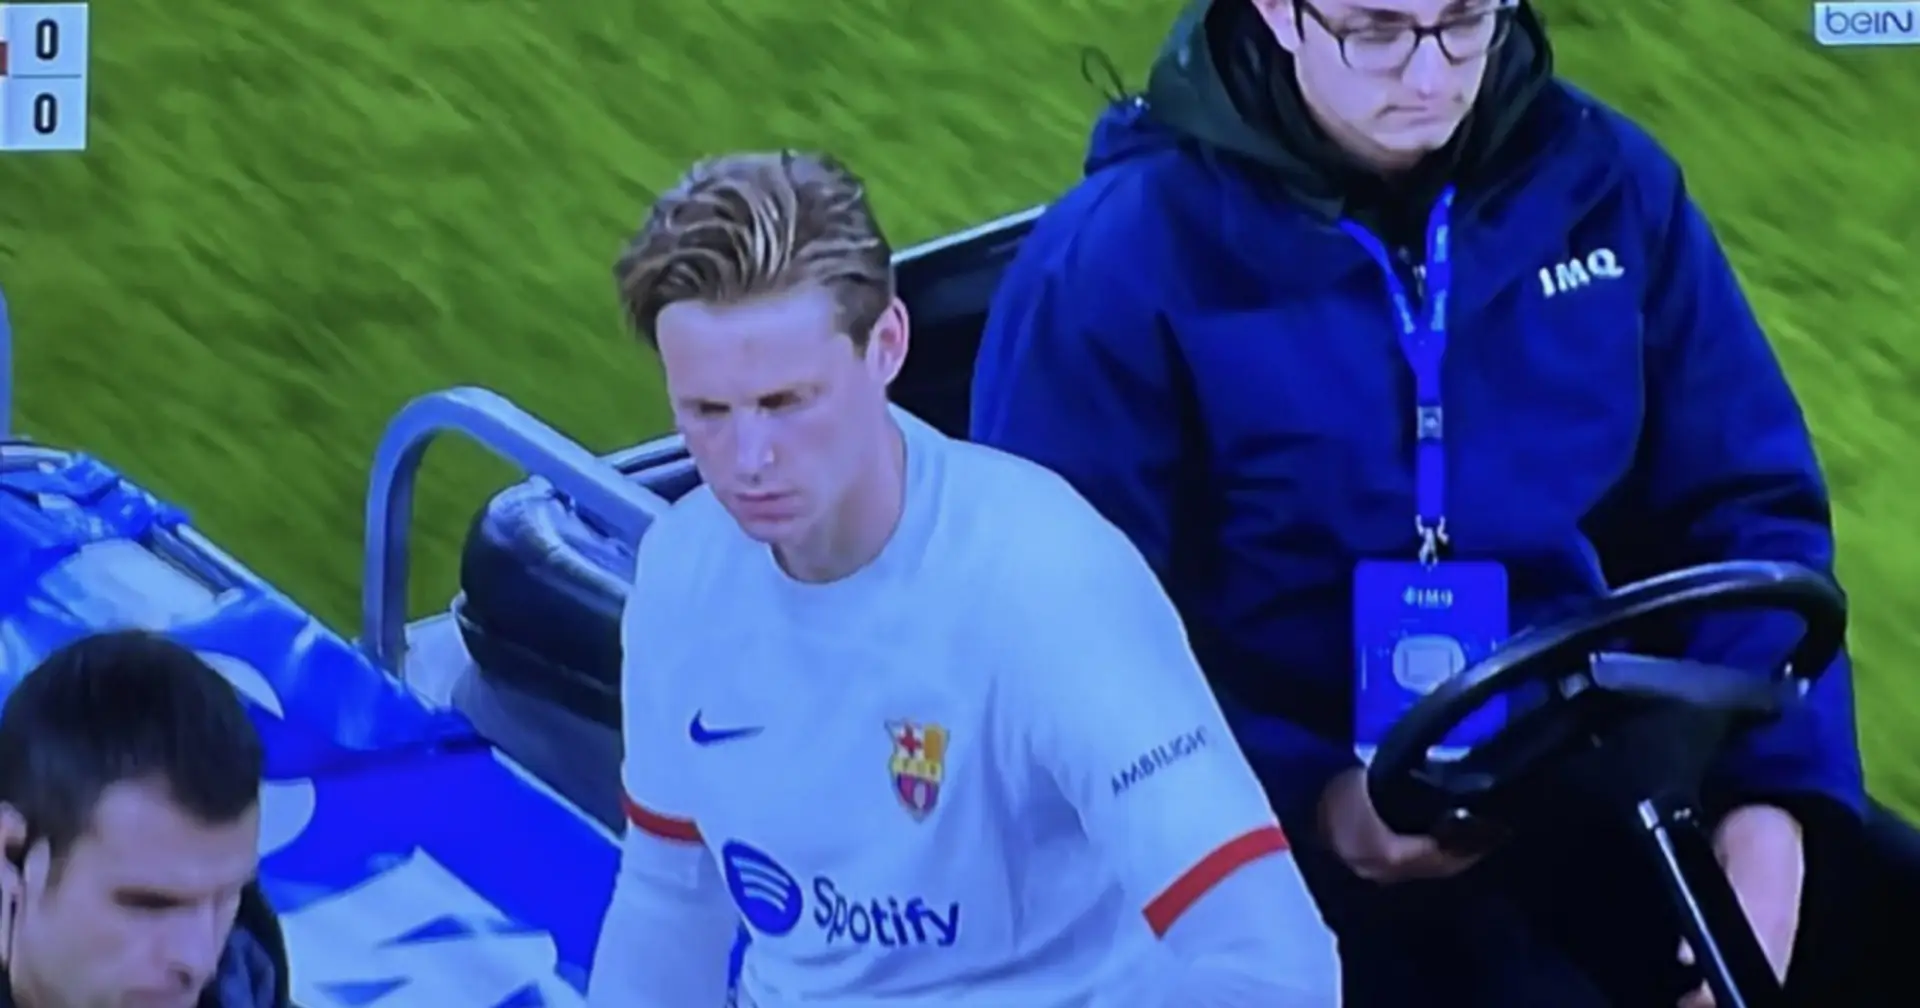 What exactly happened to Frenkie de Jong against Athletic Club